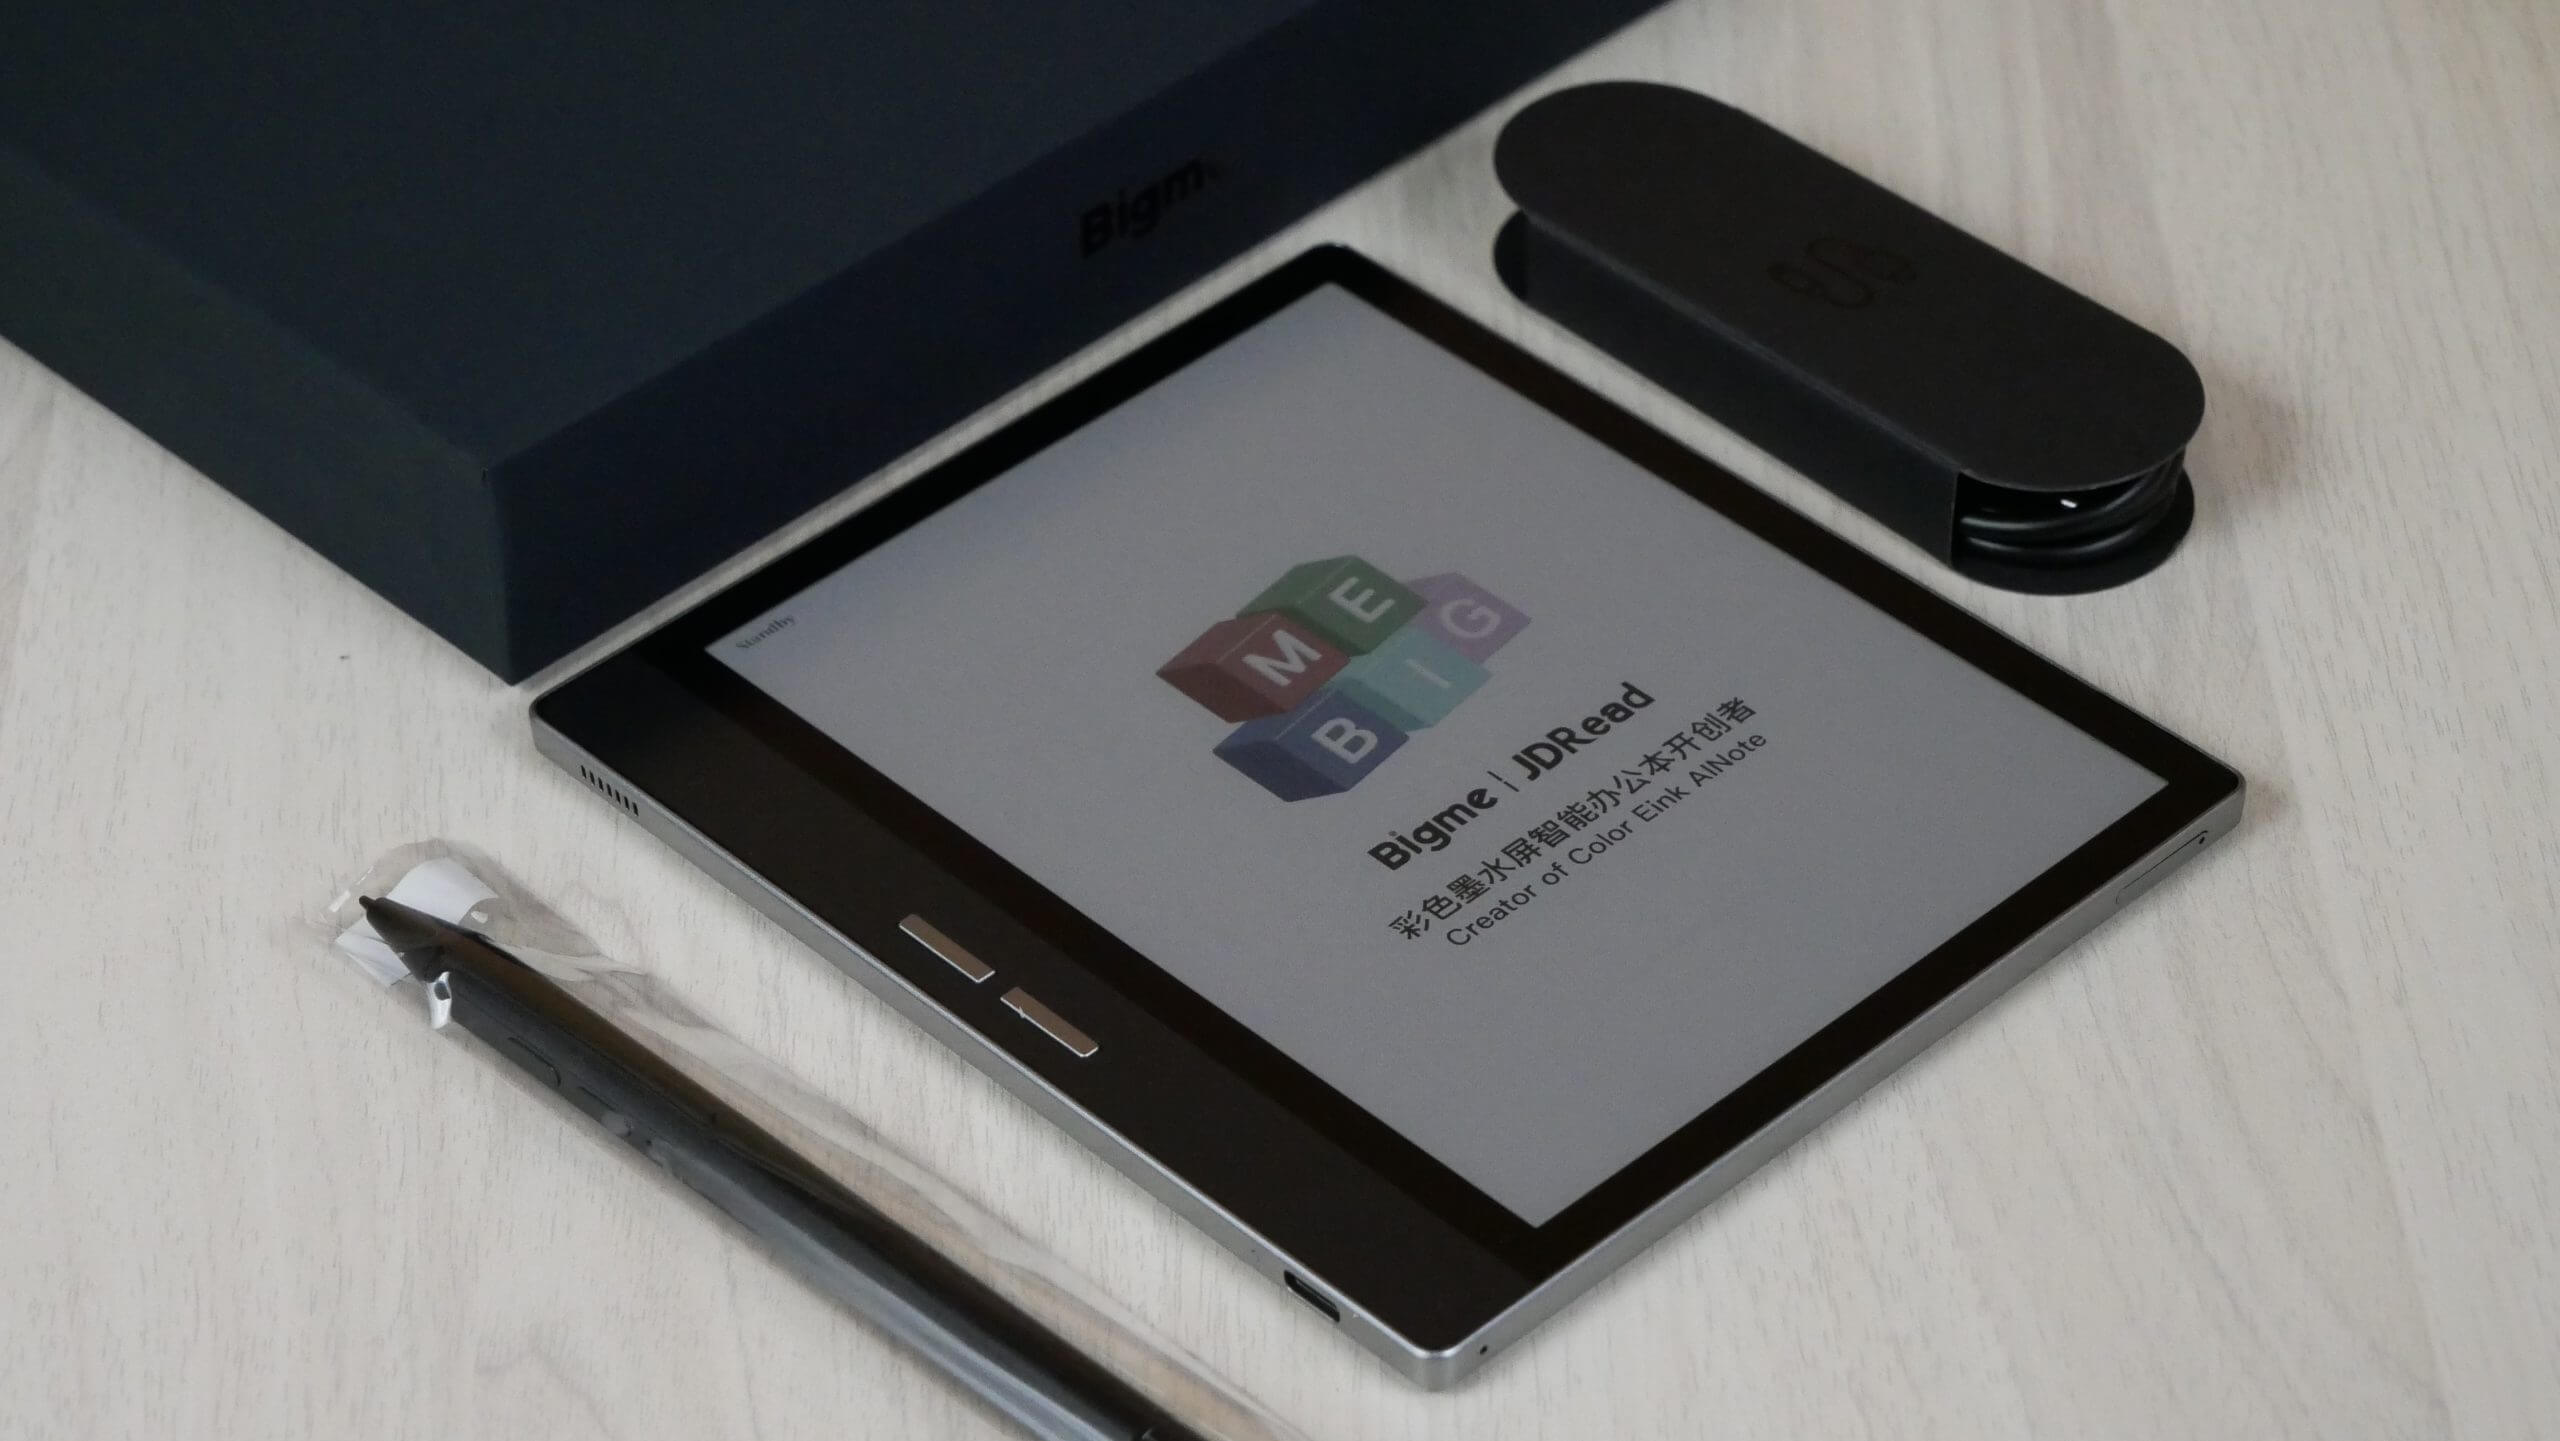 Xiaomi InkPalm 5.2 eReader is available worldwide for around $110 and up -  Liliputing